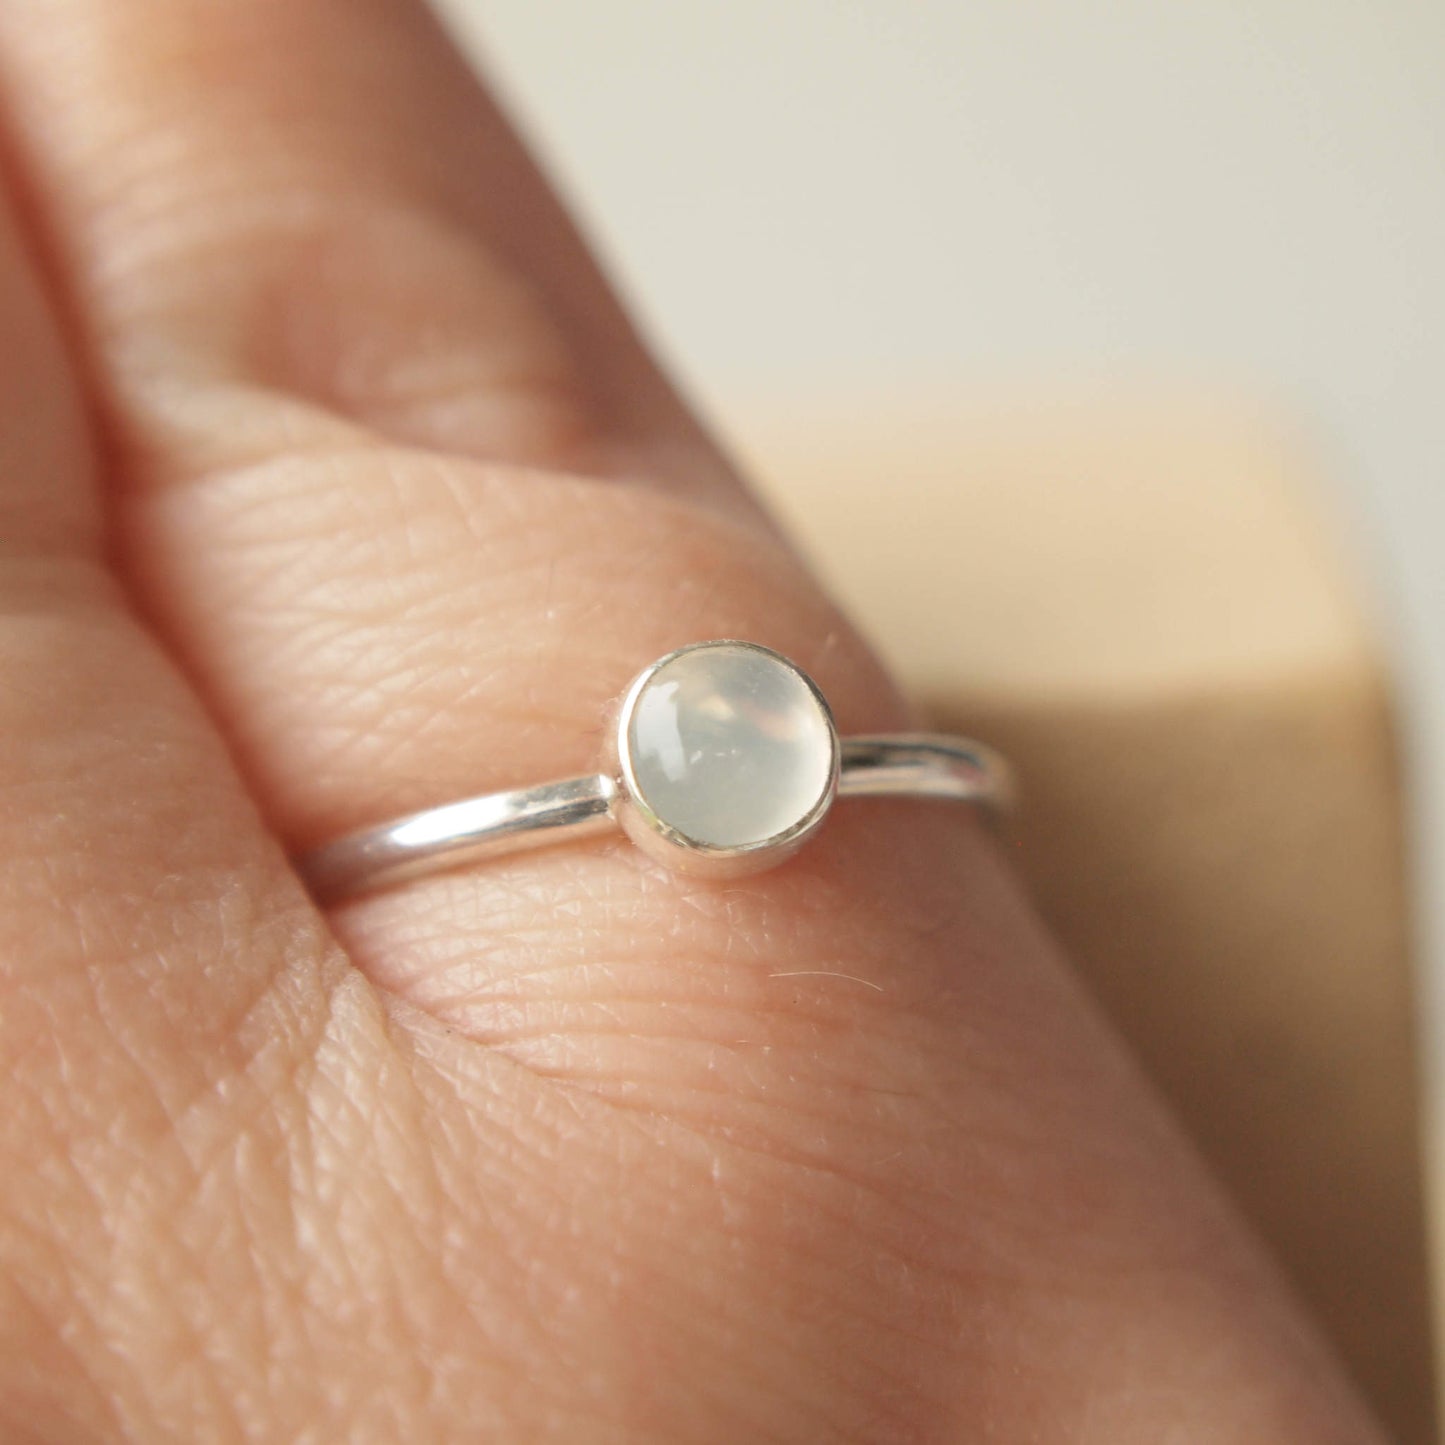 Sterling silver and moonstone cabochon ring worn on hand. 5 mm sized milky white cabochon stone on a fully round band of sterling silver. Handmade in Scotland by maram jewellery